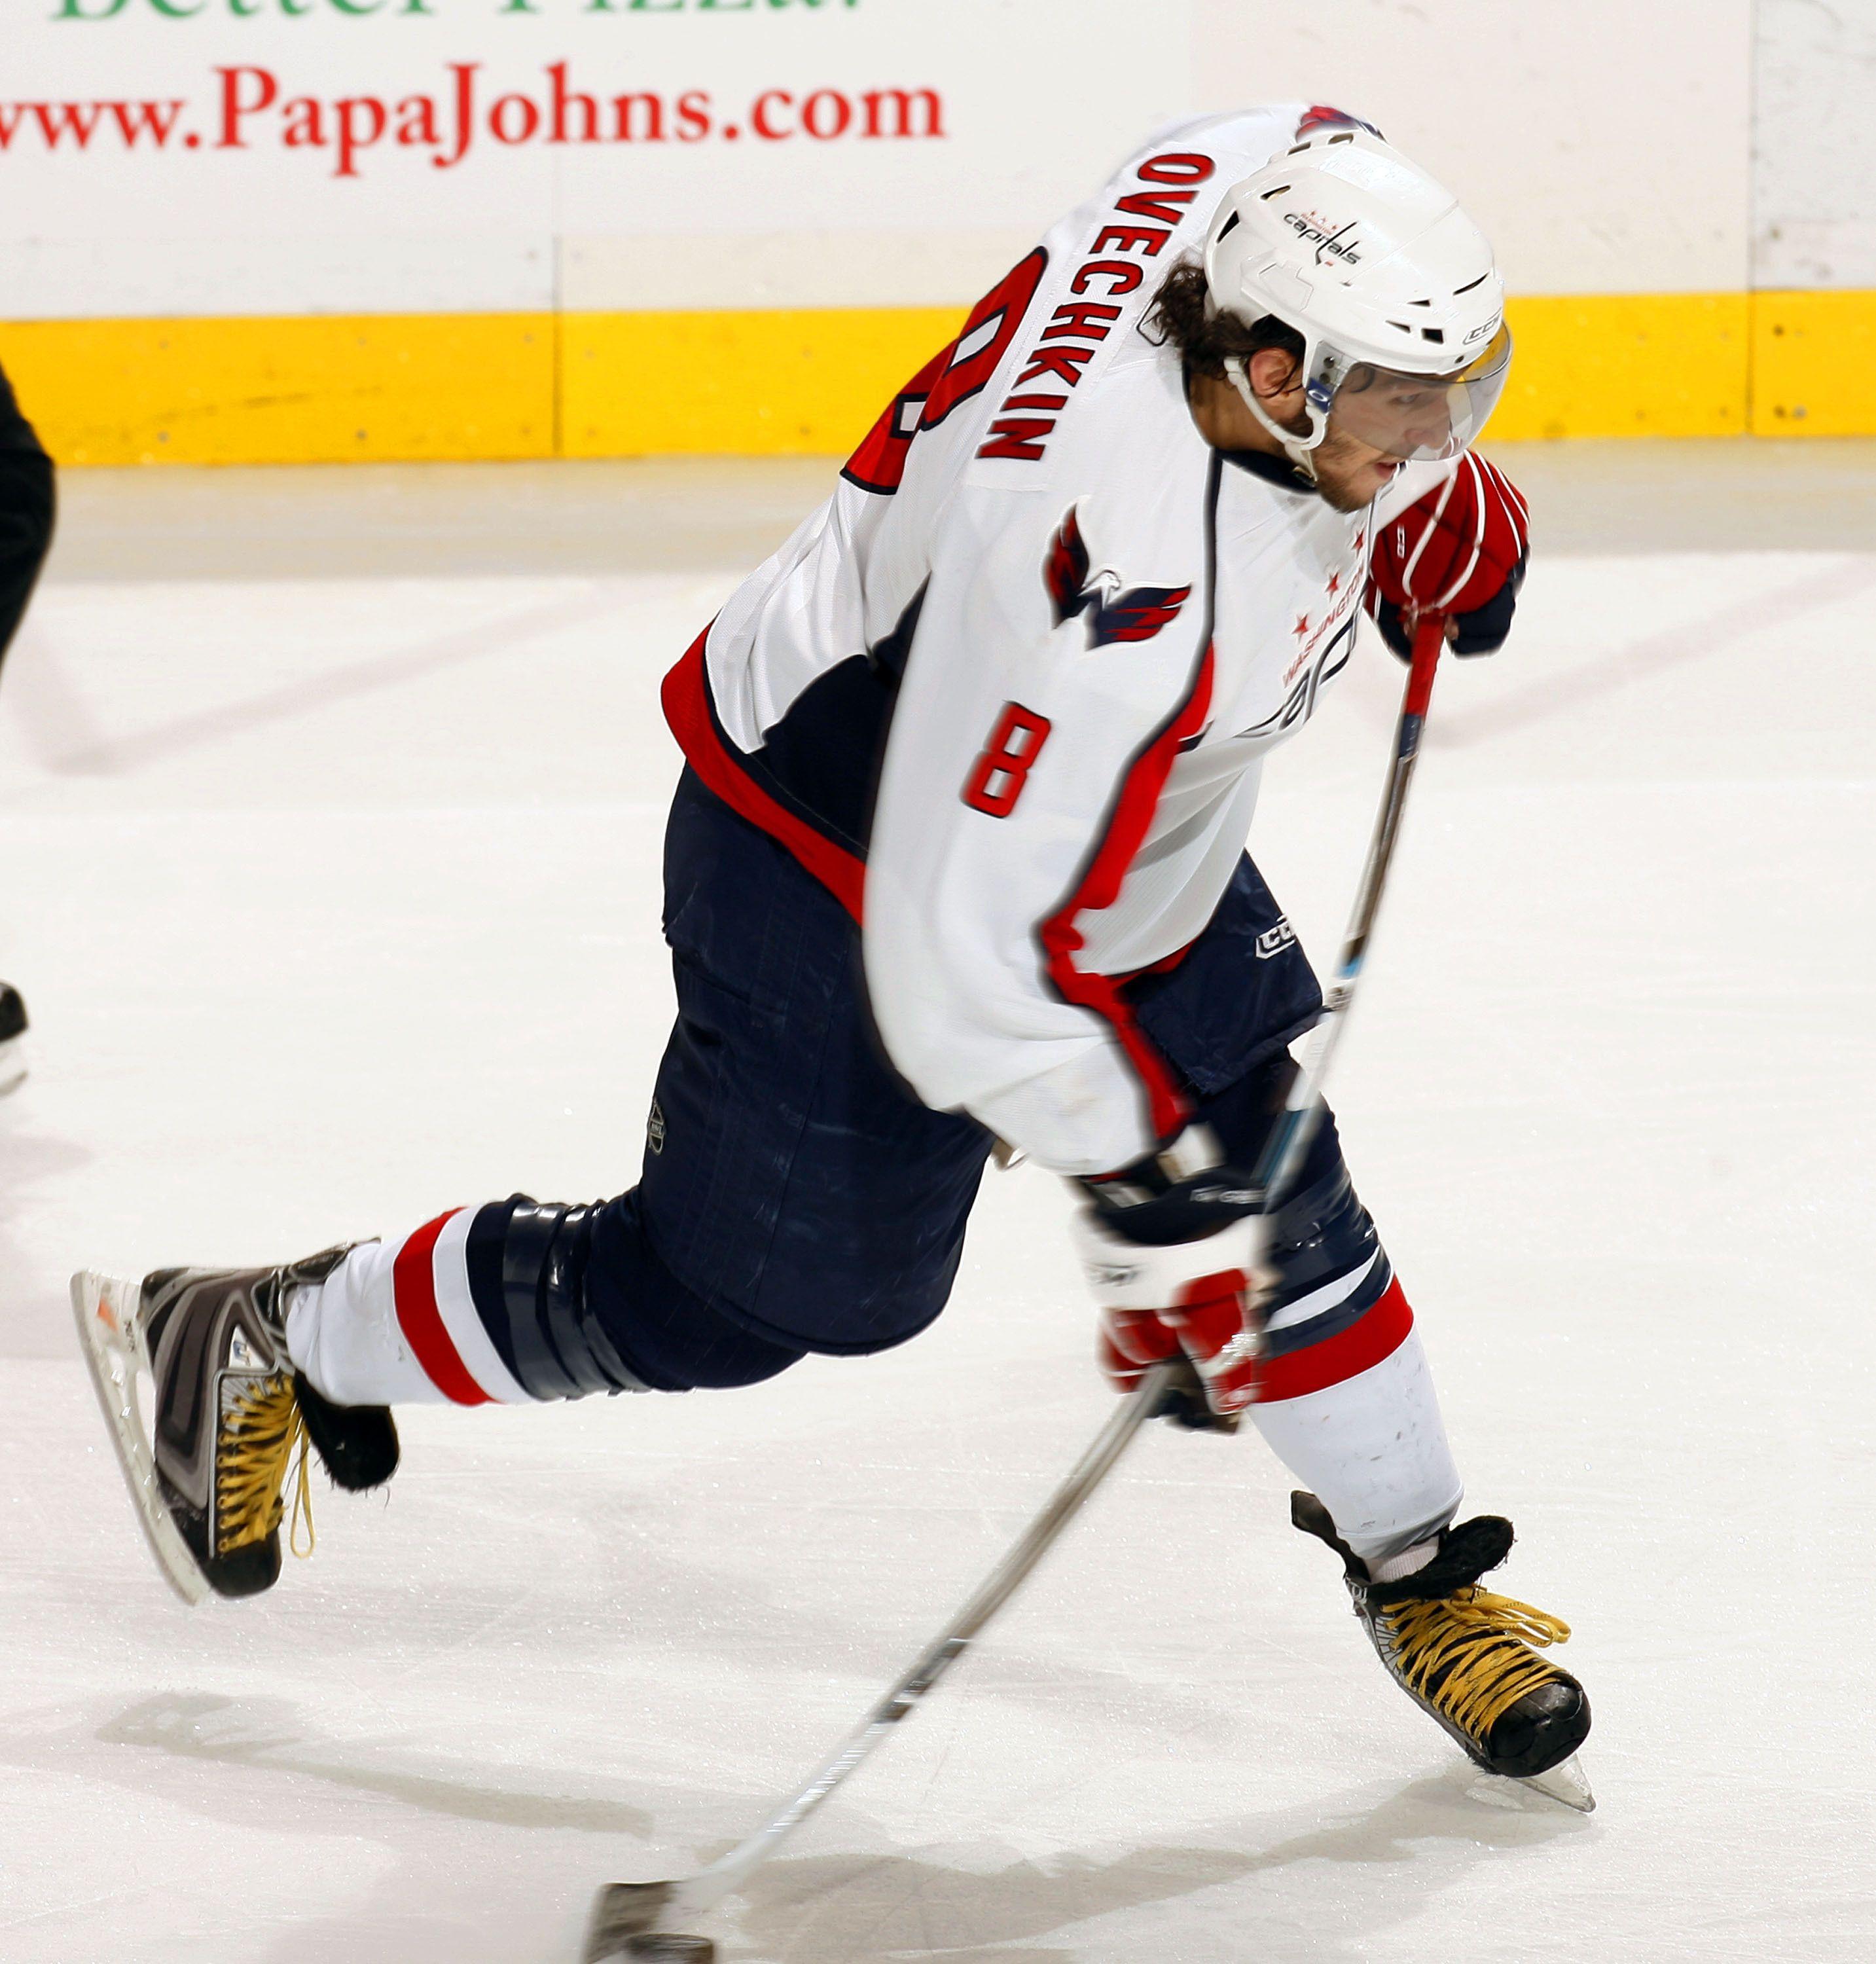 Popular NHL player Alexander Ovechkin wallpaper and image